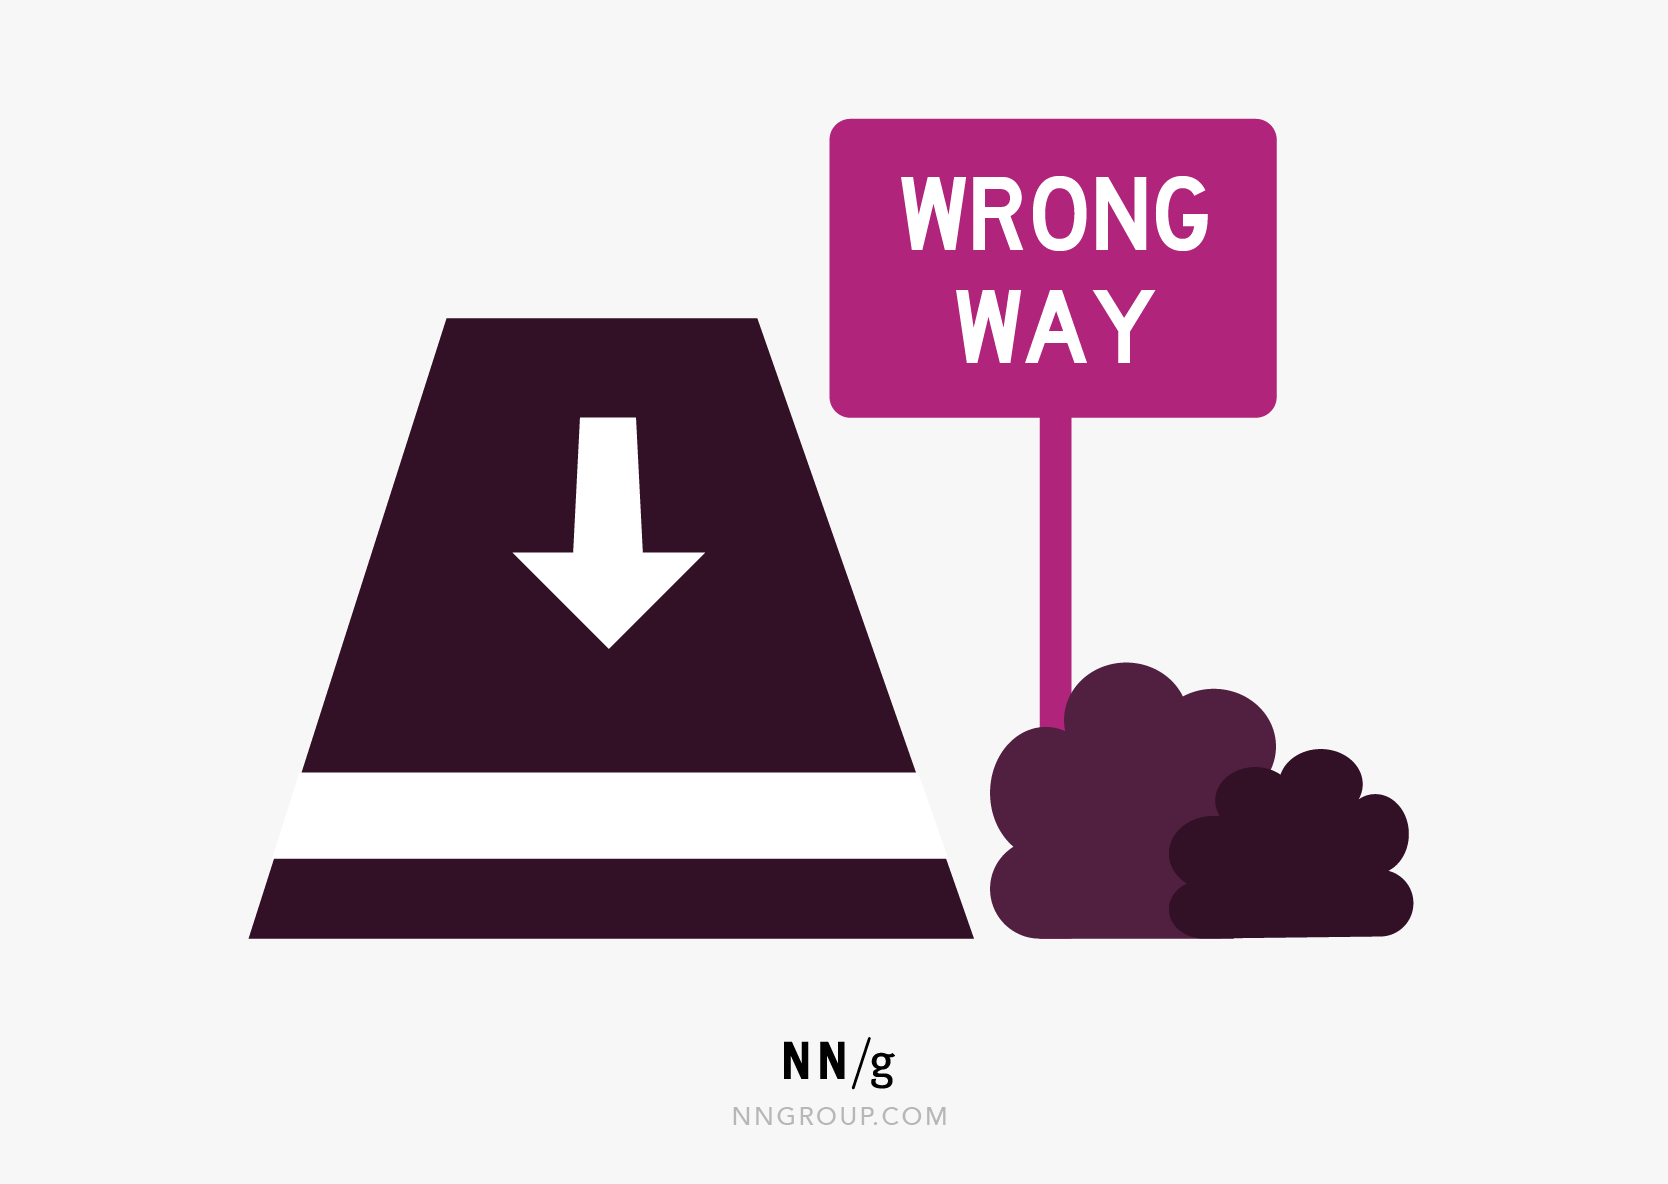 Usability Heuristic #9: A picture of a road with a wrong way sign to the right that would warn drivers not to enter. 